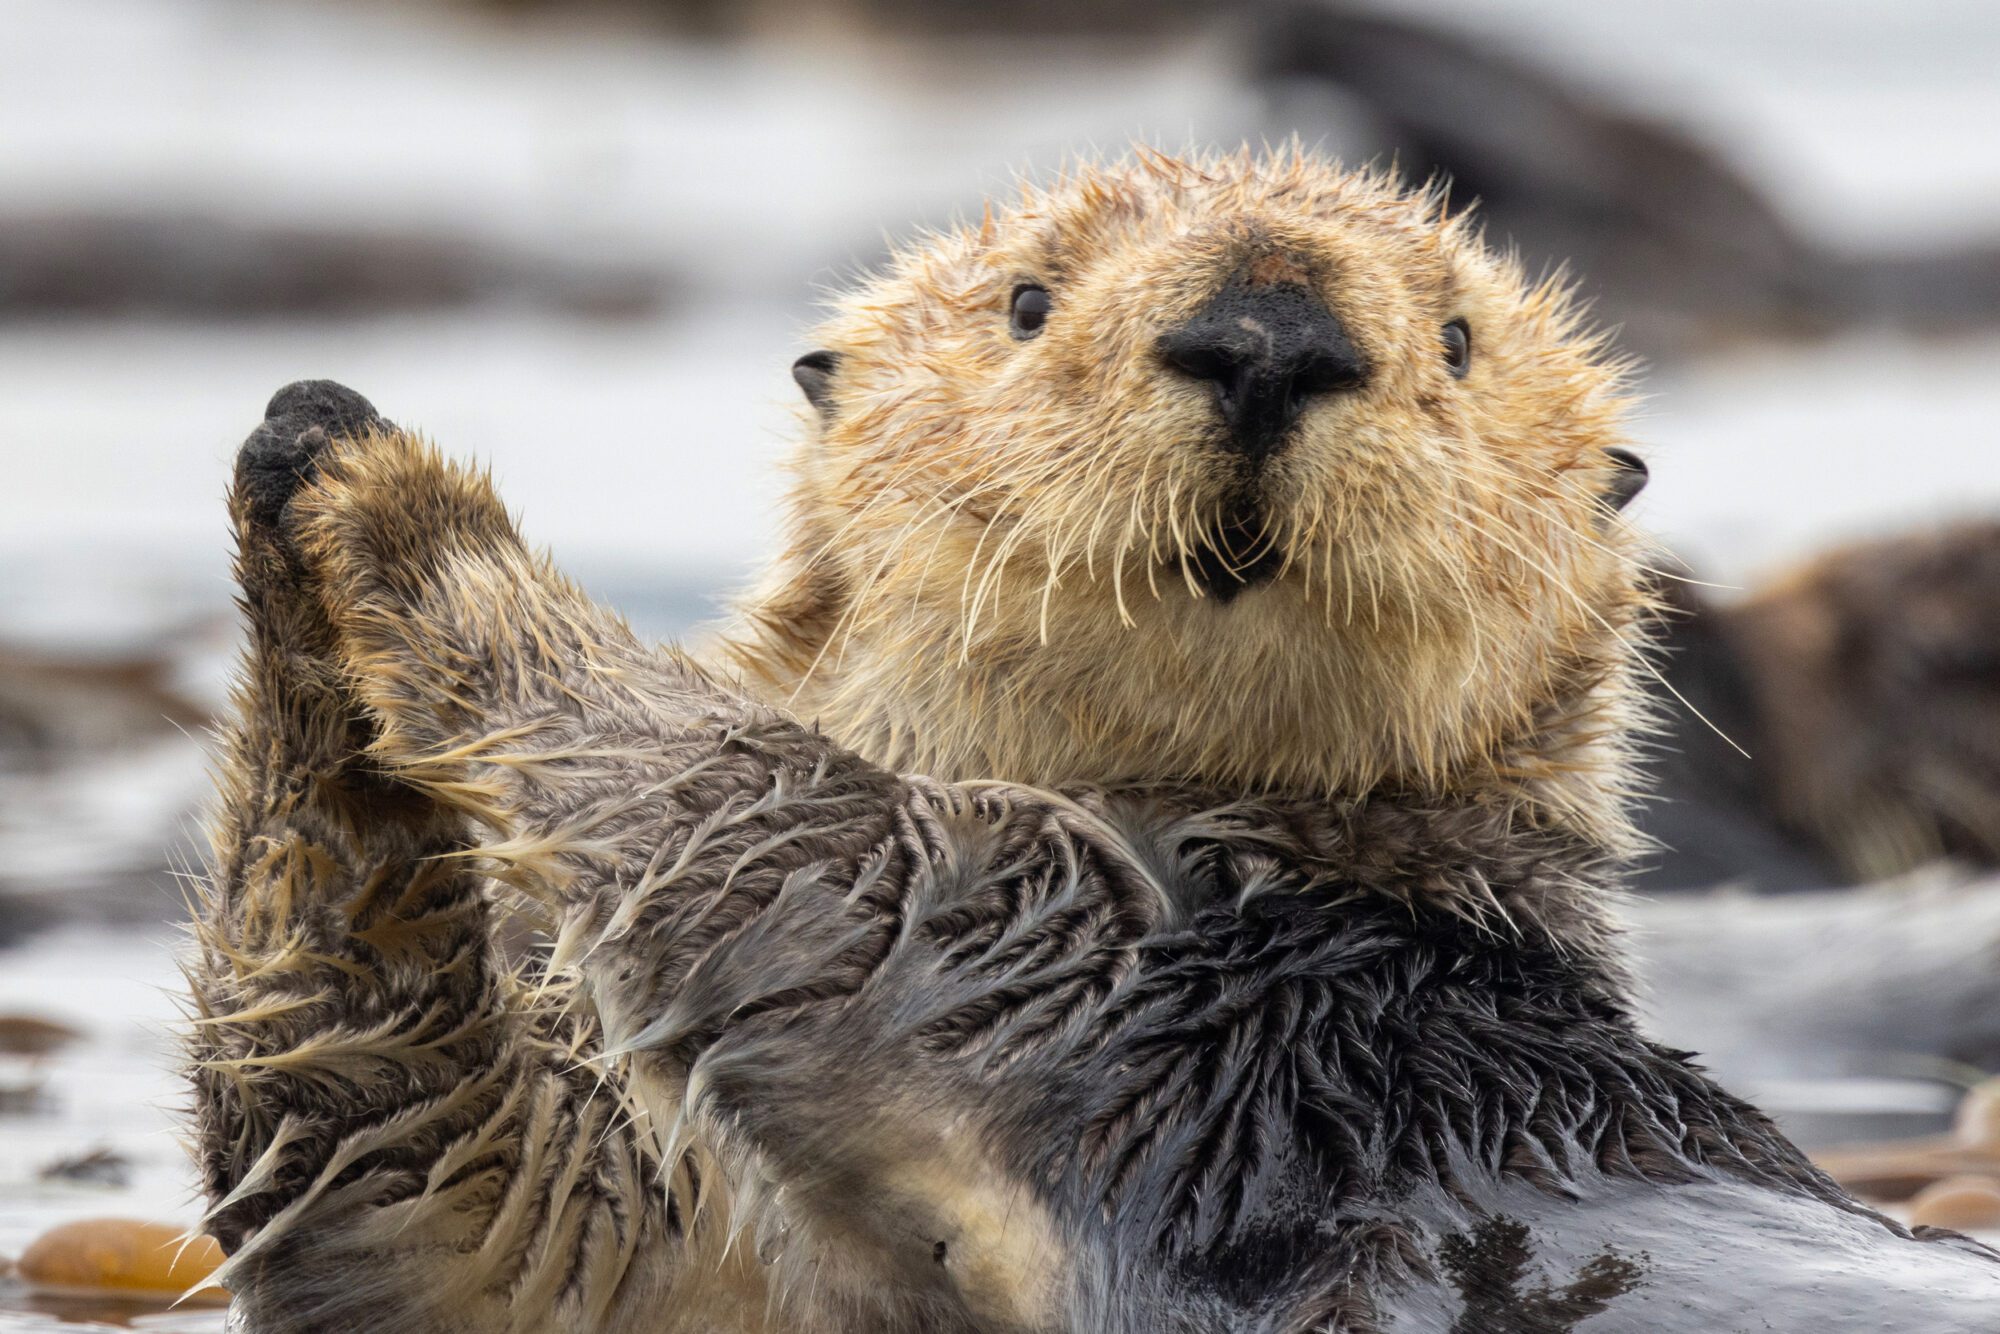 An otter i water looks like it's praying with its wet paws clasped together, looking straight at the camera with its fluffy blonde face and dark nose